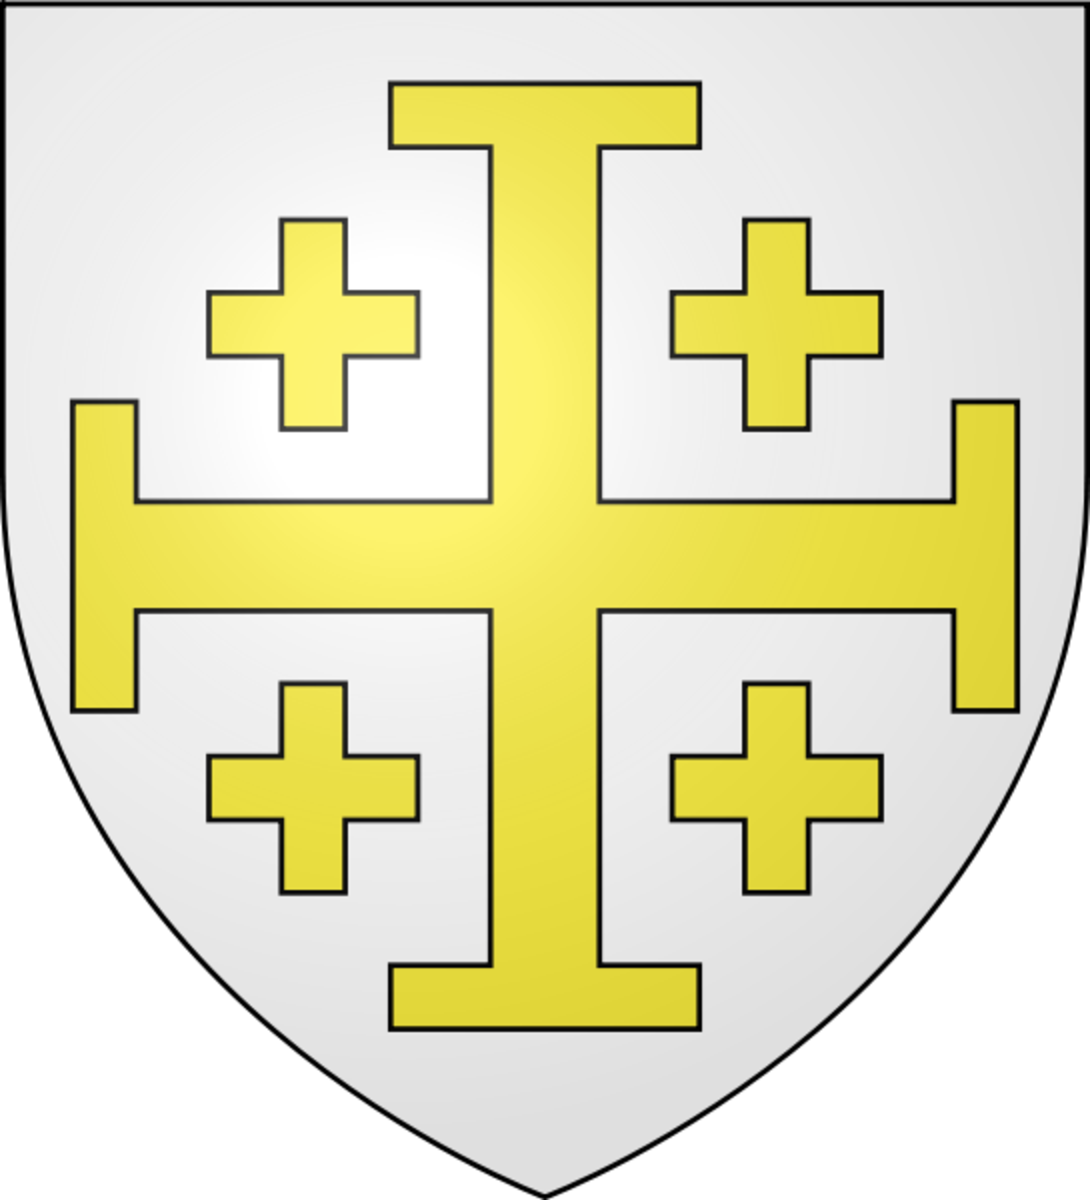 This is the emblem of the Kingdom of Jerusalem, which at the time was under the control of the Crusaders.